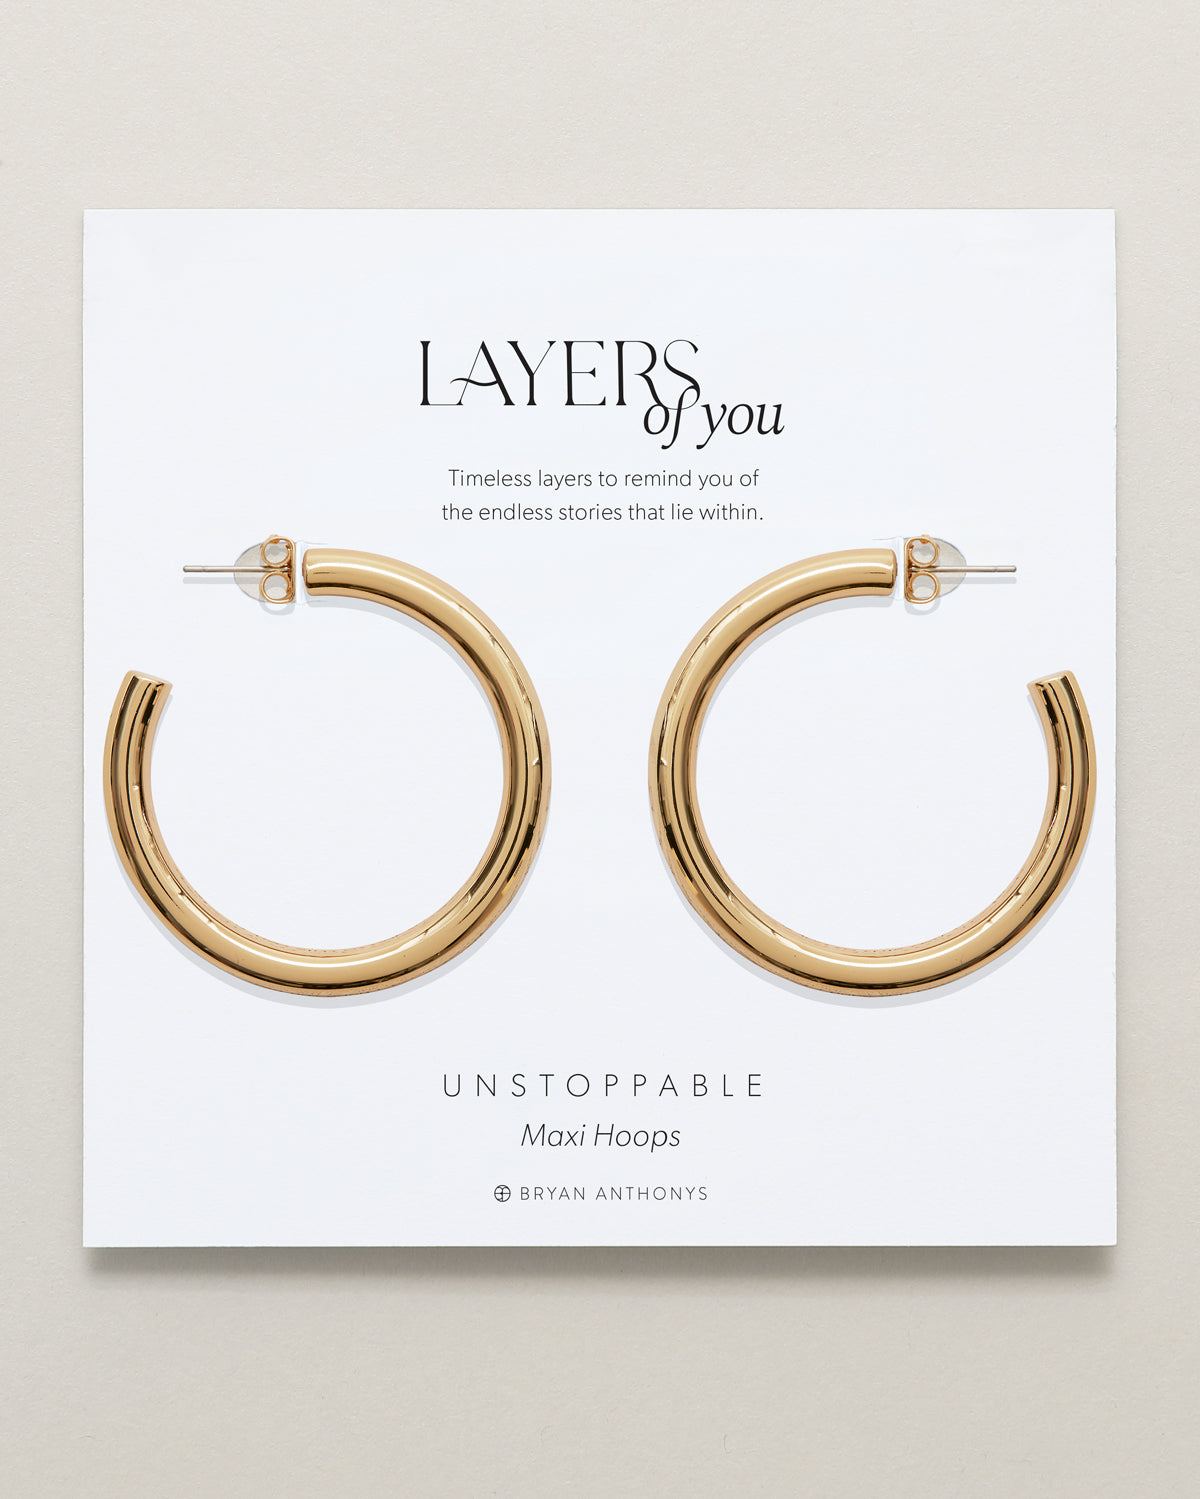 Bryan Anthonys Layers of You Gold Unstoppable Maxi Hoops On Card